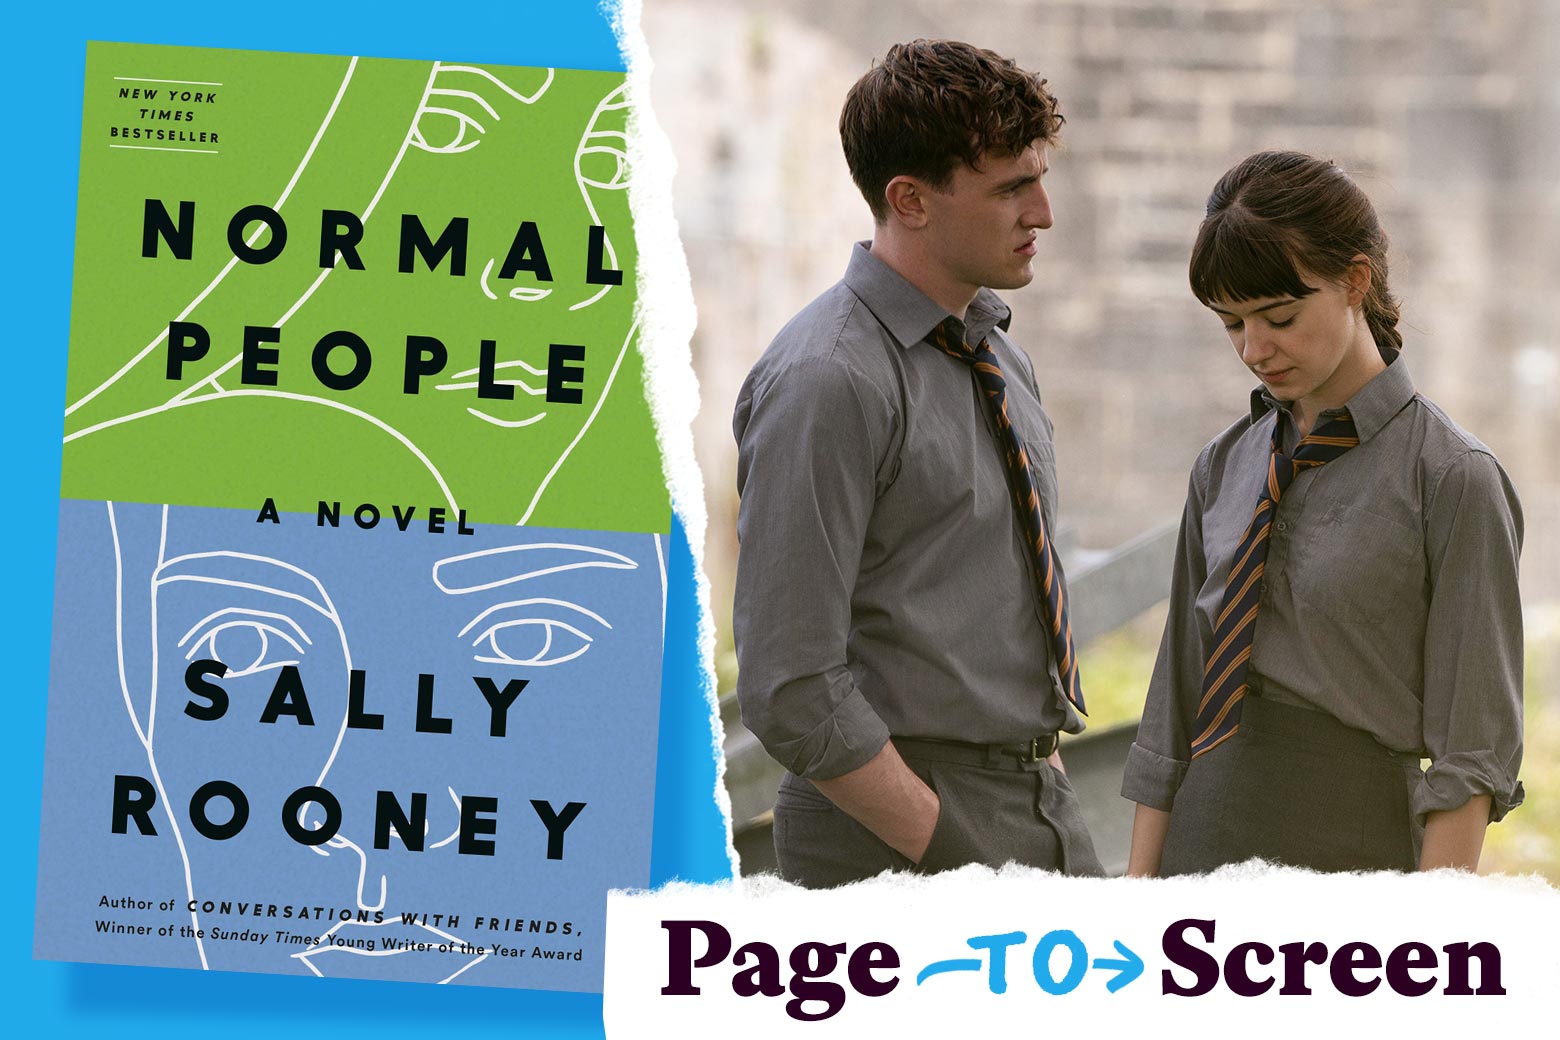 Left, a copy of Normal People by Sally Rooney. Right, a young man and woman stand close together. A tearaway label reads "Page to Screen."